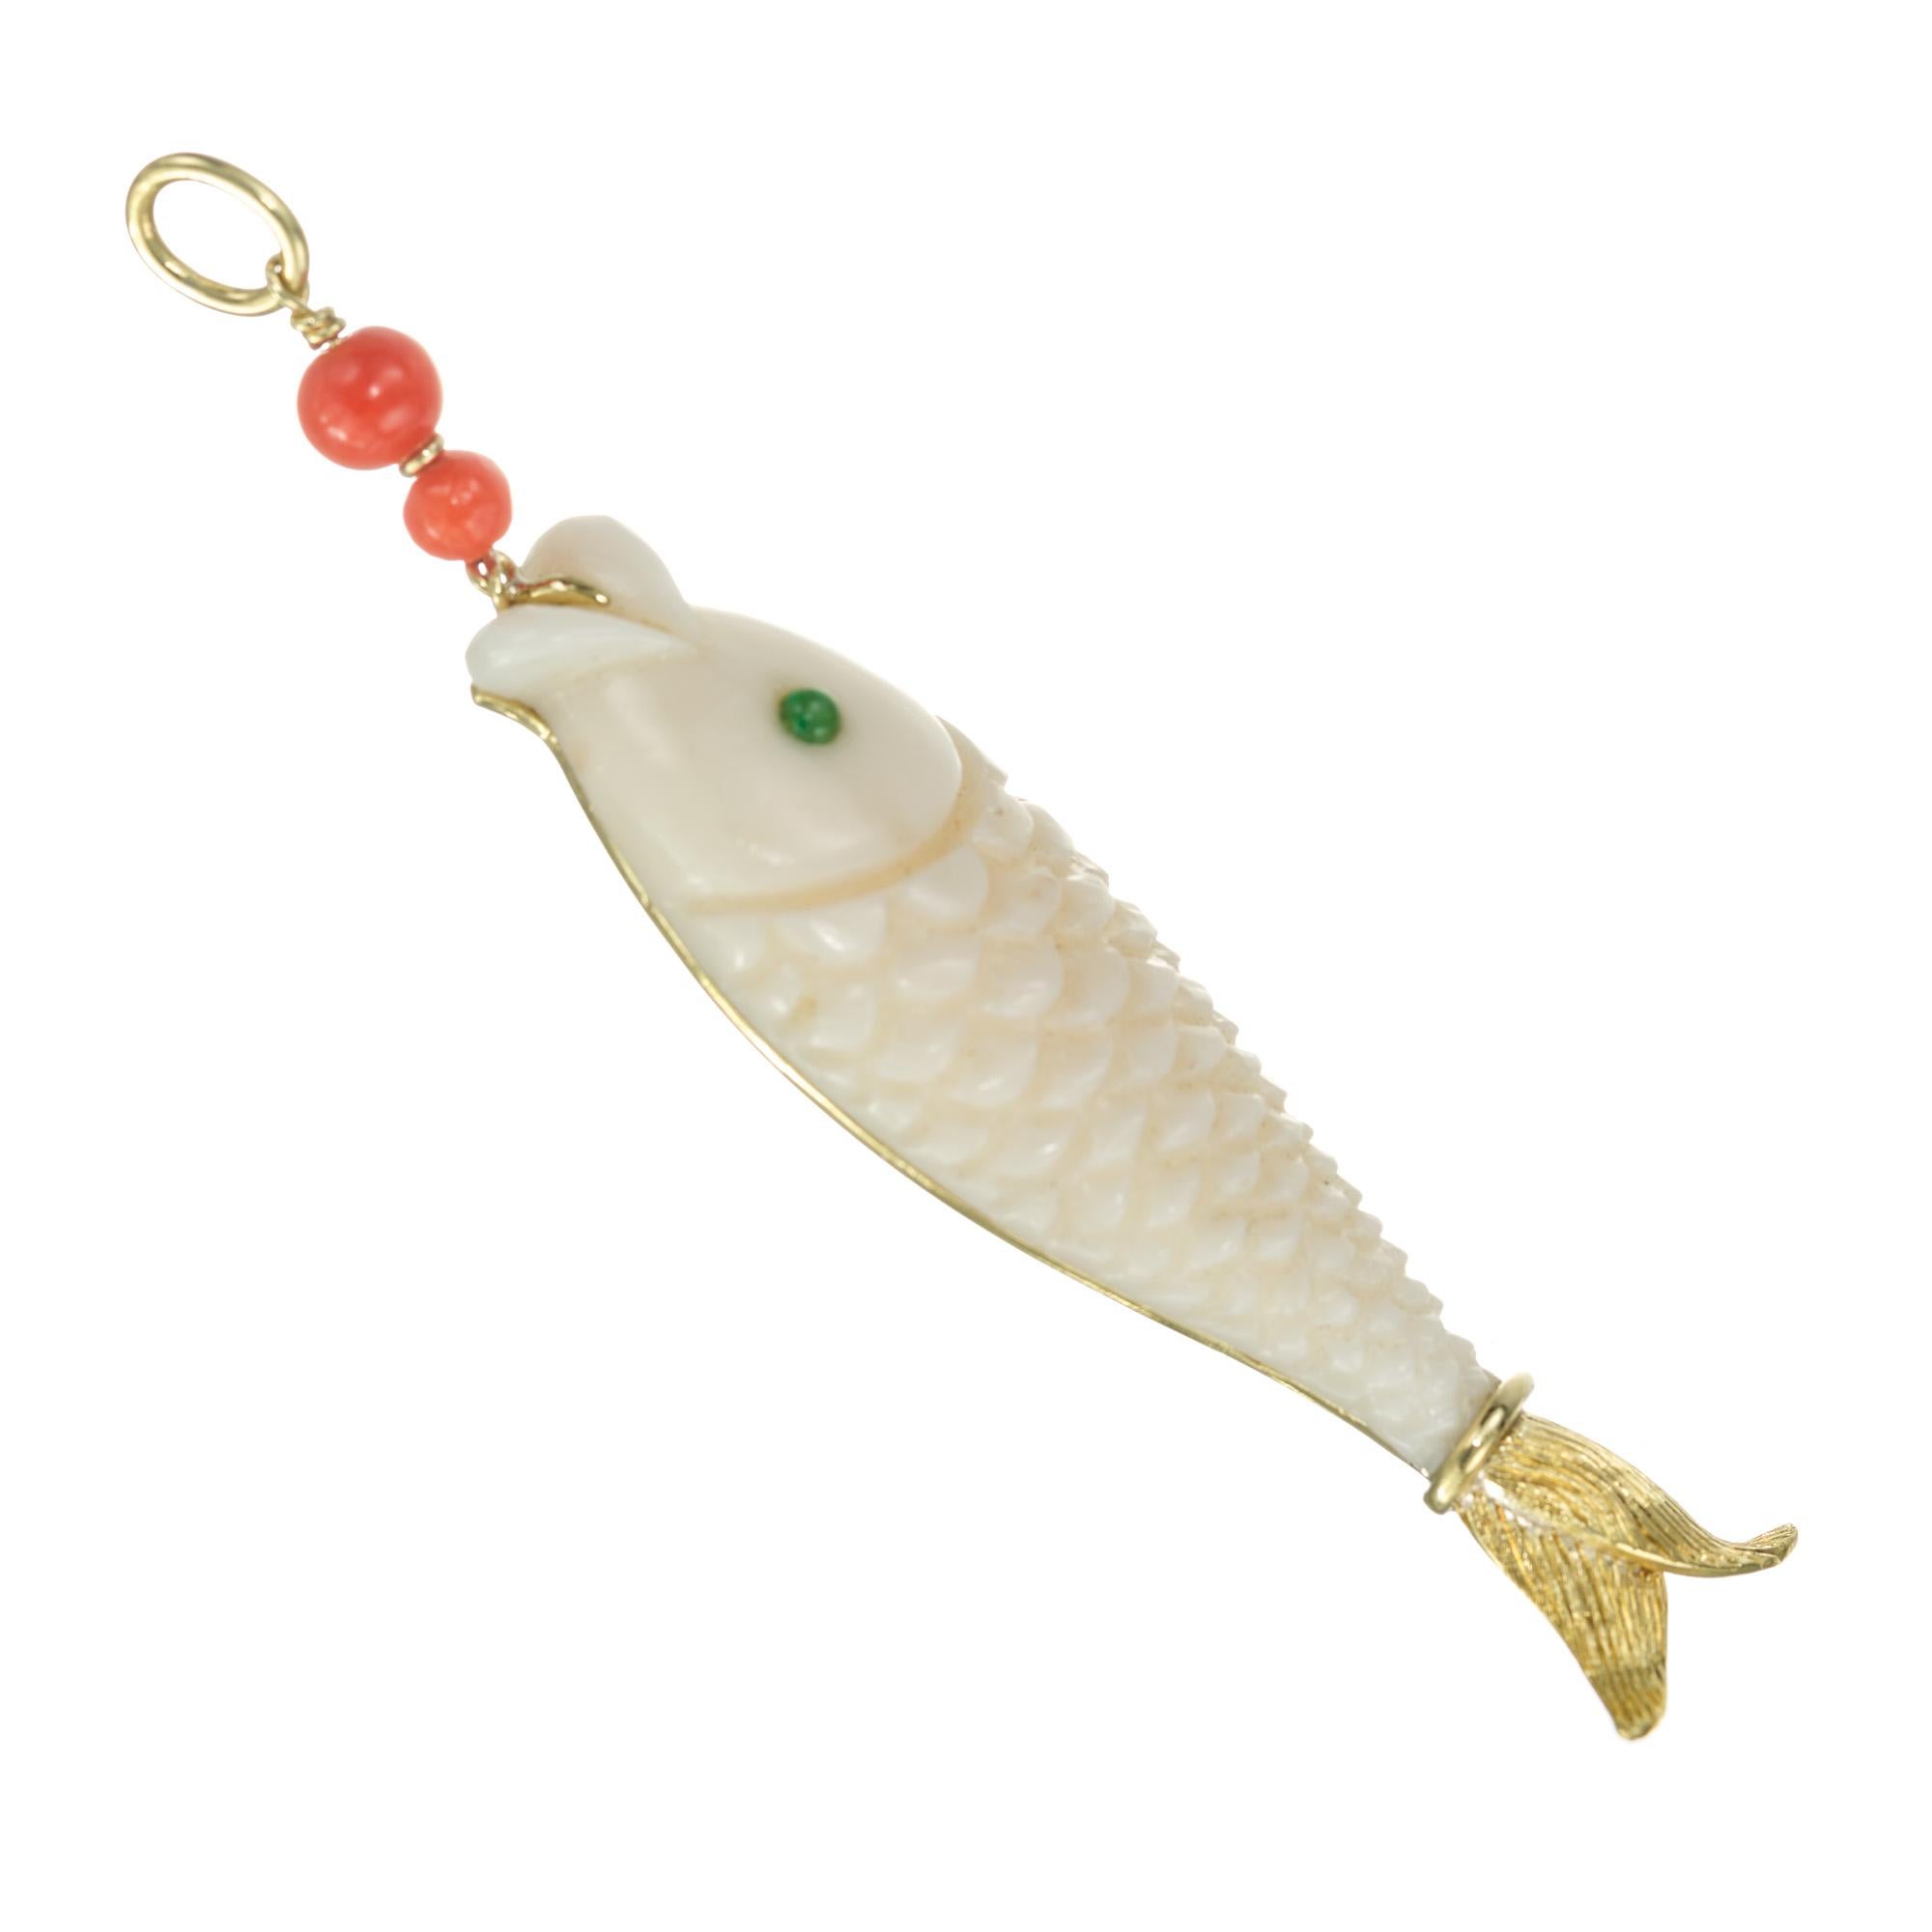 From the designer Trio. Vintage 1980's Angel skin coral fish pendant with an emerald eye and 3 orange red coral beads with a 18k yellow gold fishtail.

1 white carved coral fish
2 orange red coral beads
1 green cabochon emerald, approx. .5cts
18k